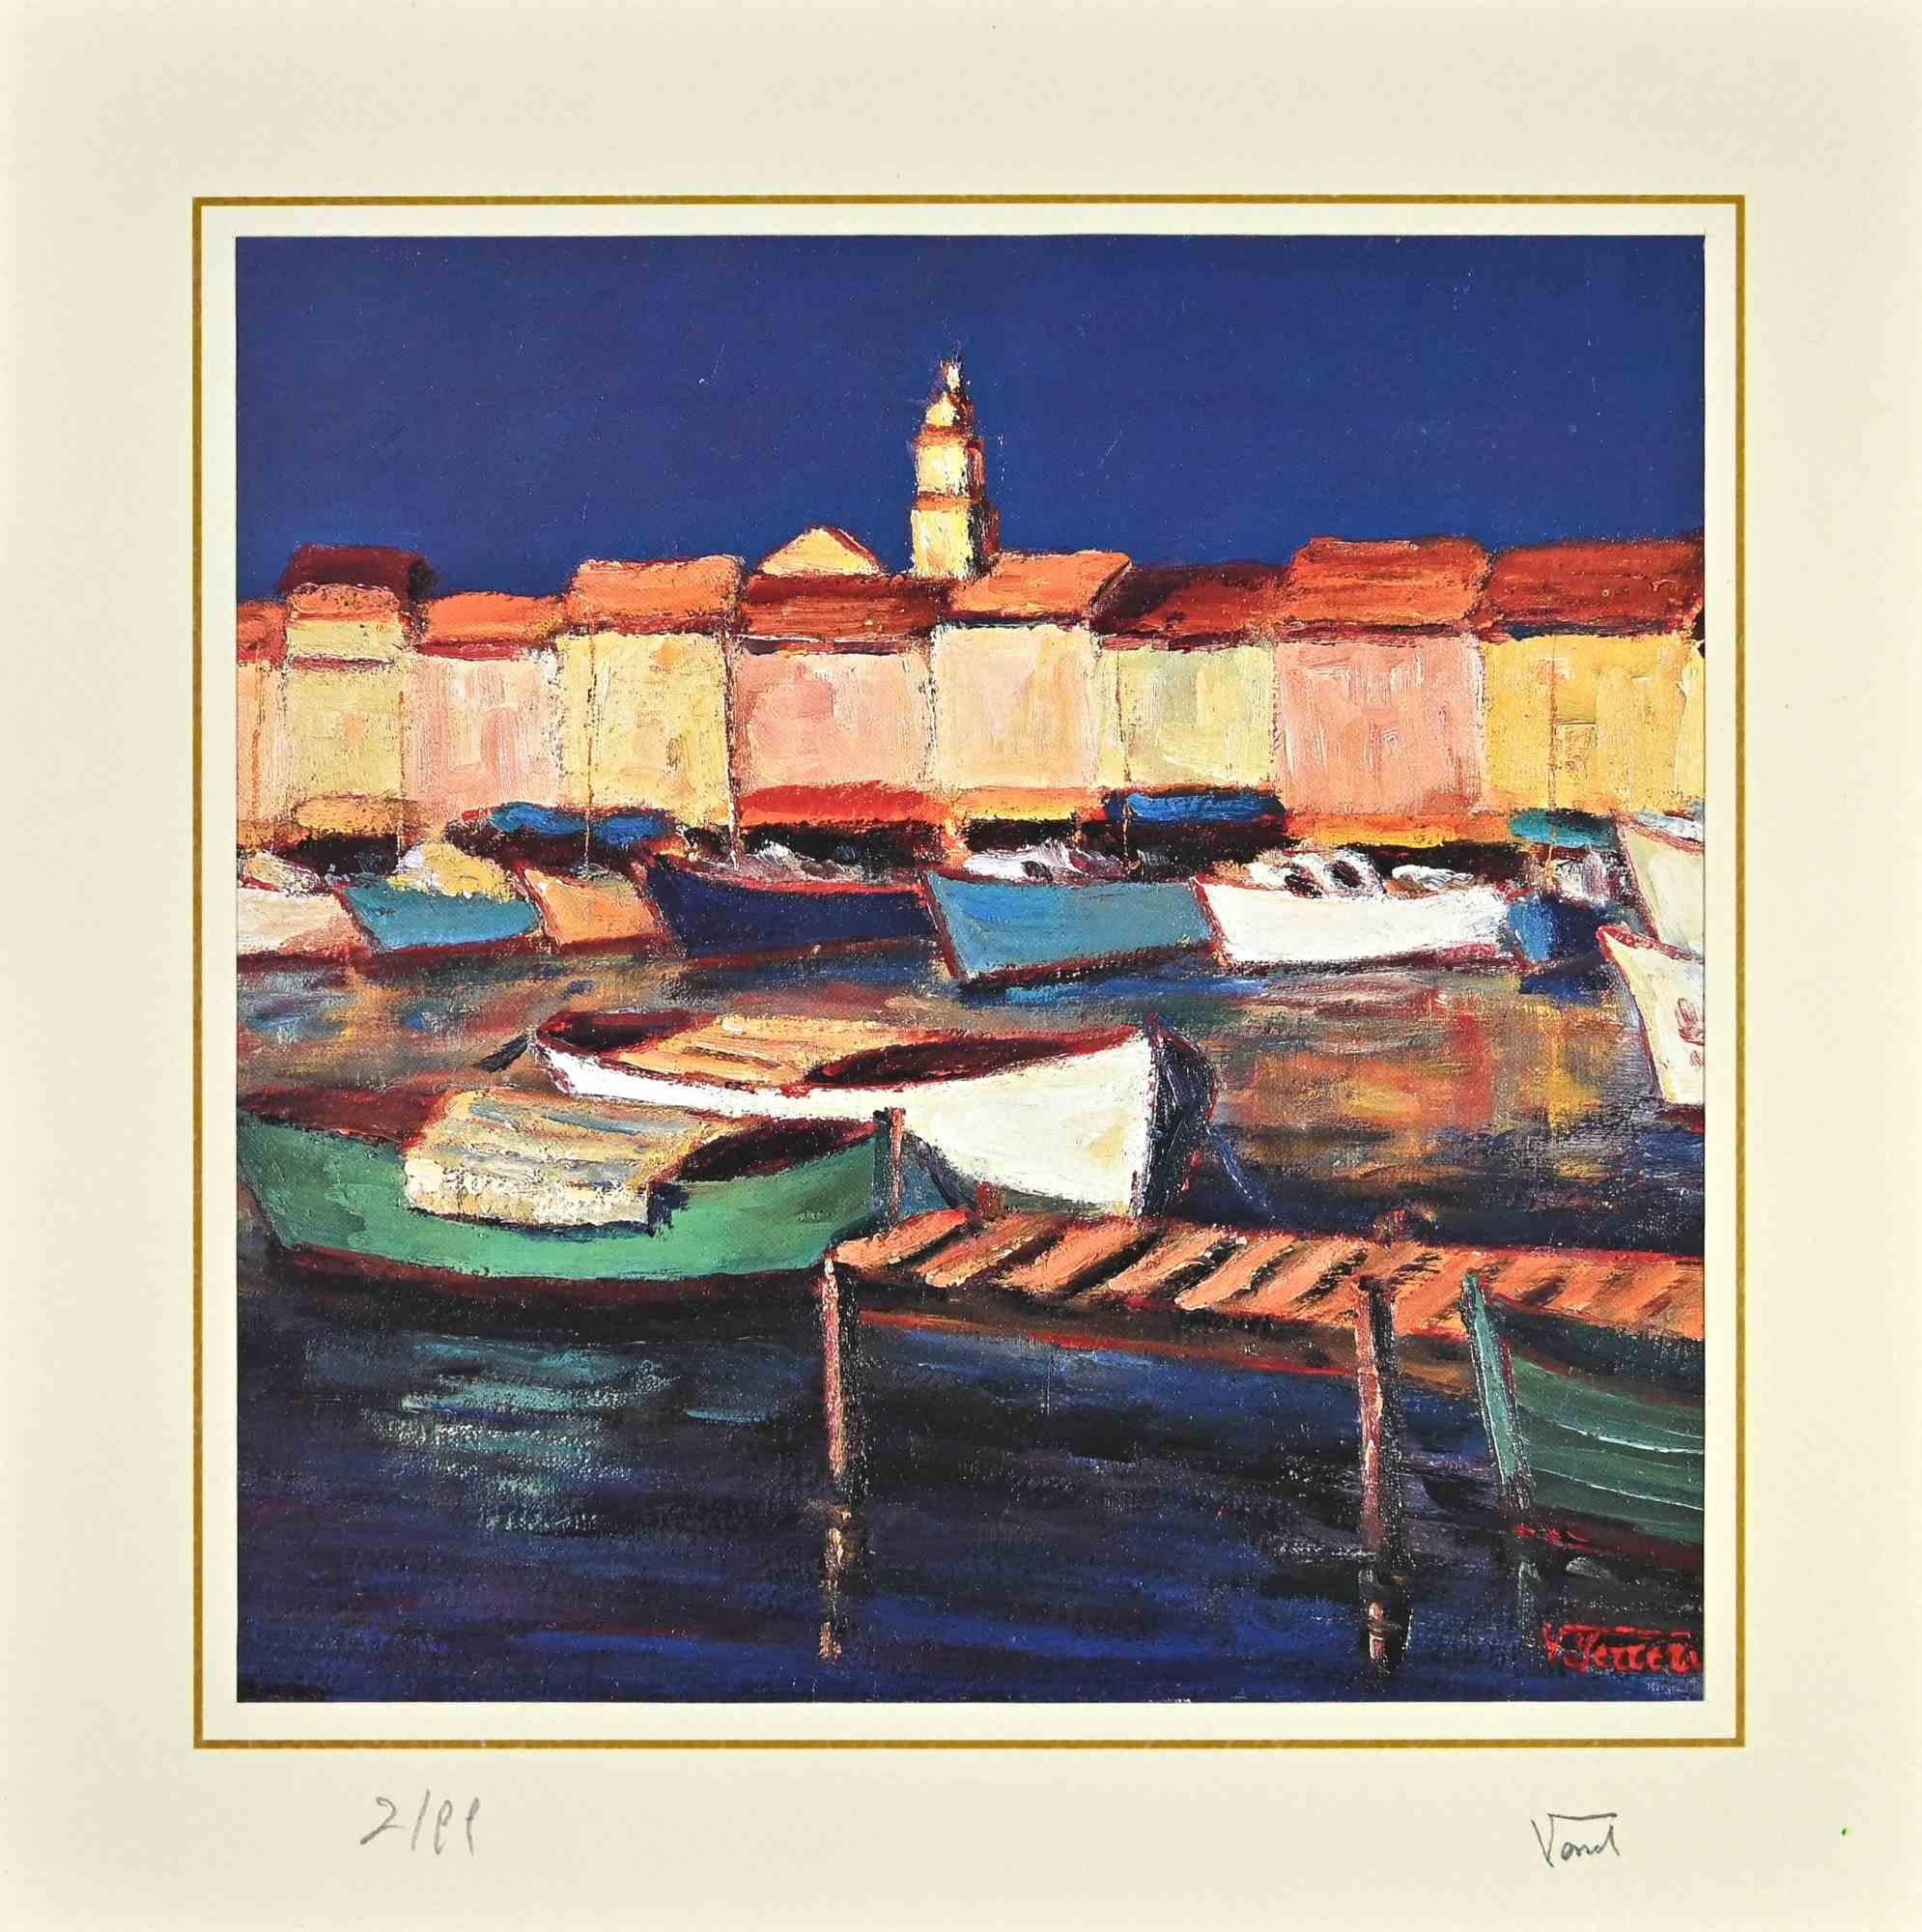 The Picturesque Harbor is a lithograph attributed to Nicholas Verrall (1945) in the Late 20th Century.

Hand-signed on the right corner. Numbered, Edition, 2/99, on the left margin. On the back is the label of the certificate of  authenticity.

The